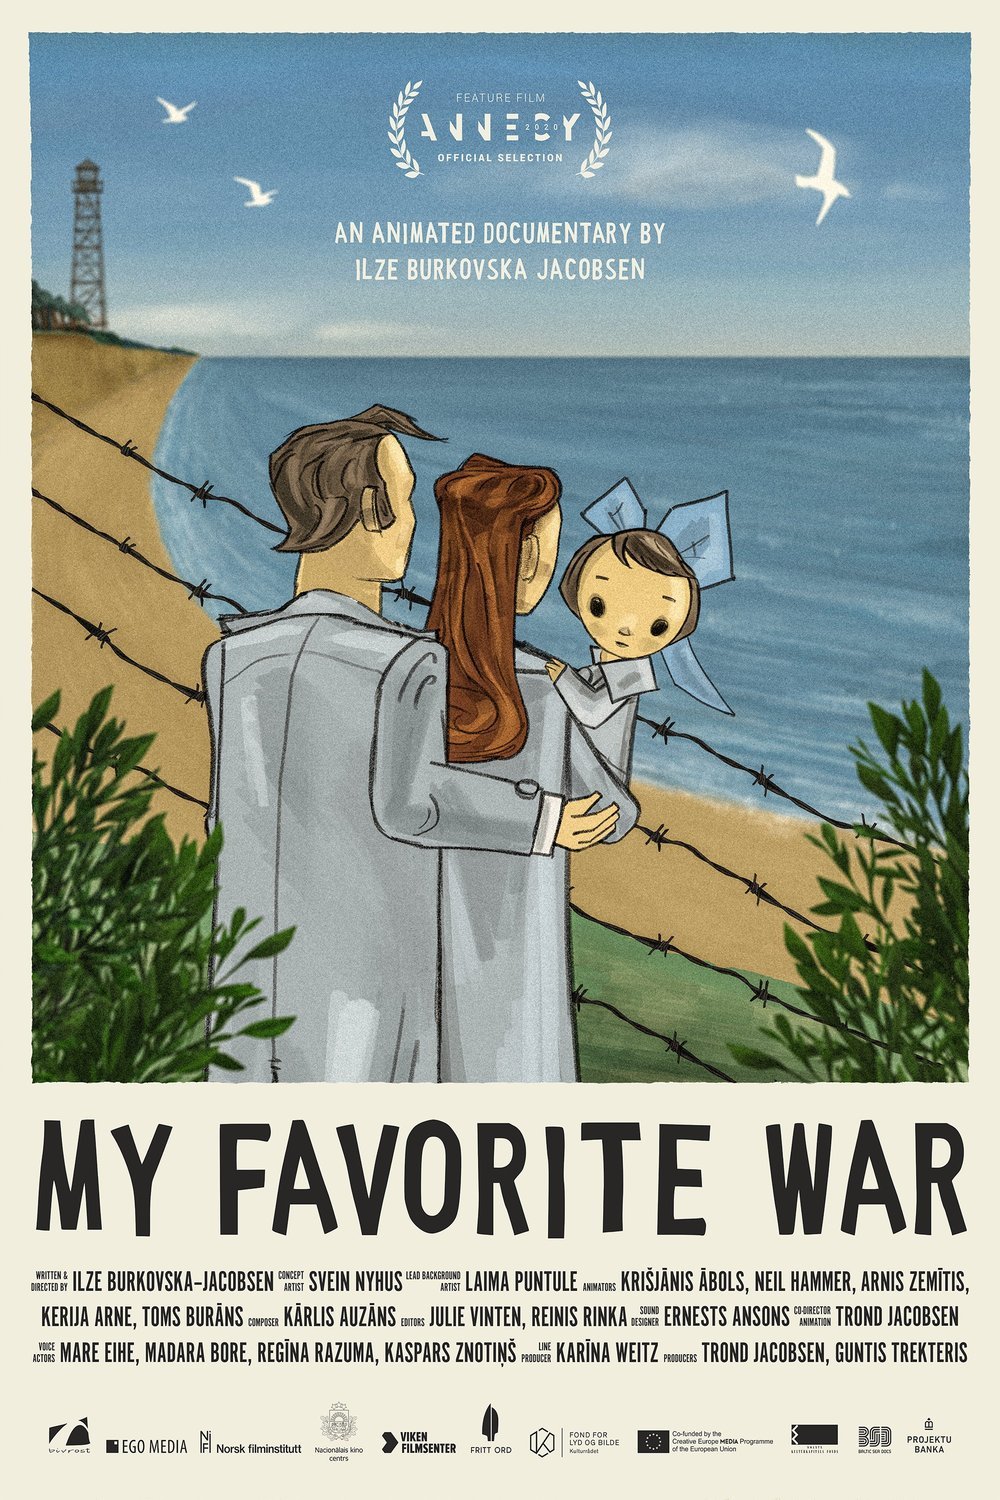 Poster of the movie My Favorite War